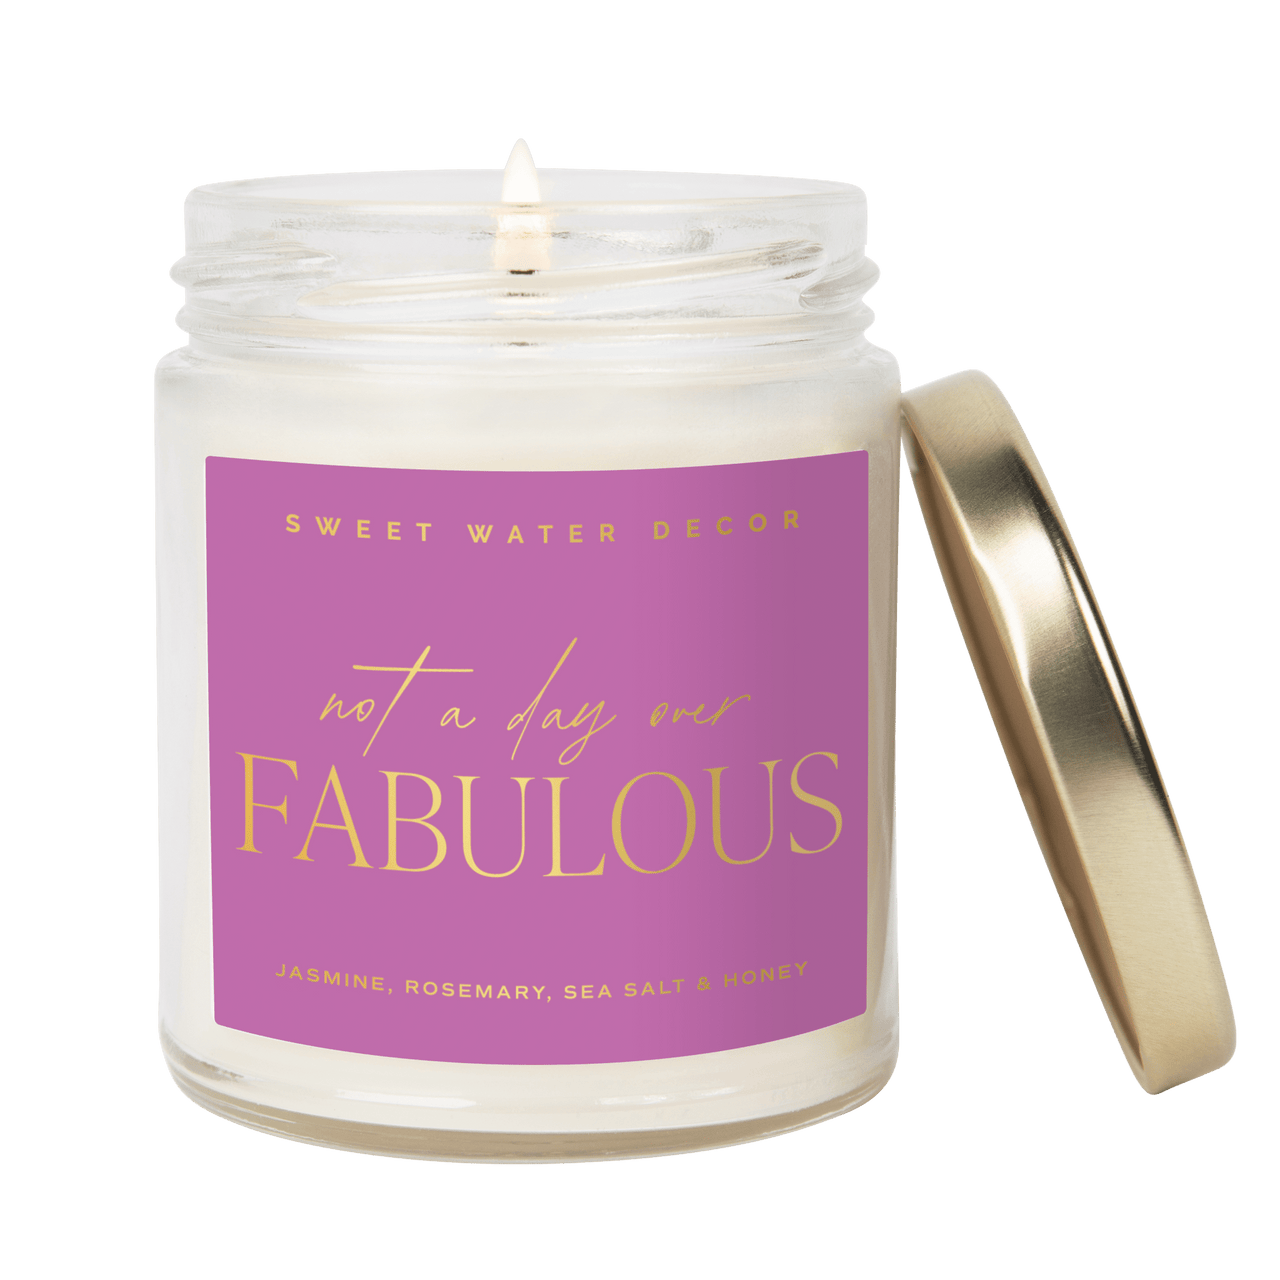 Not A Day Over Fabulous Soy Candle - Clear Jar - 9 oz (Wildflowers and Salt) - Tony's Home Furnishings